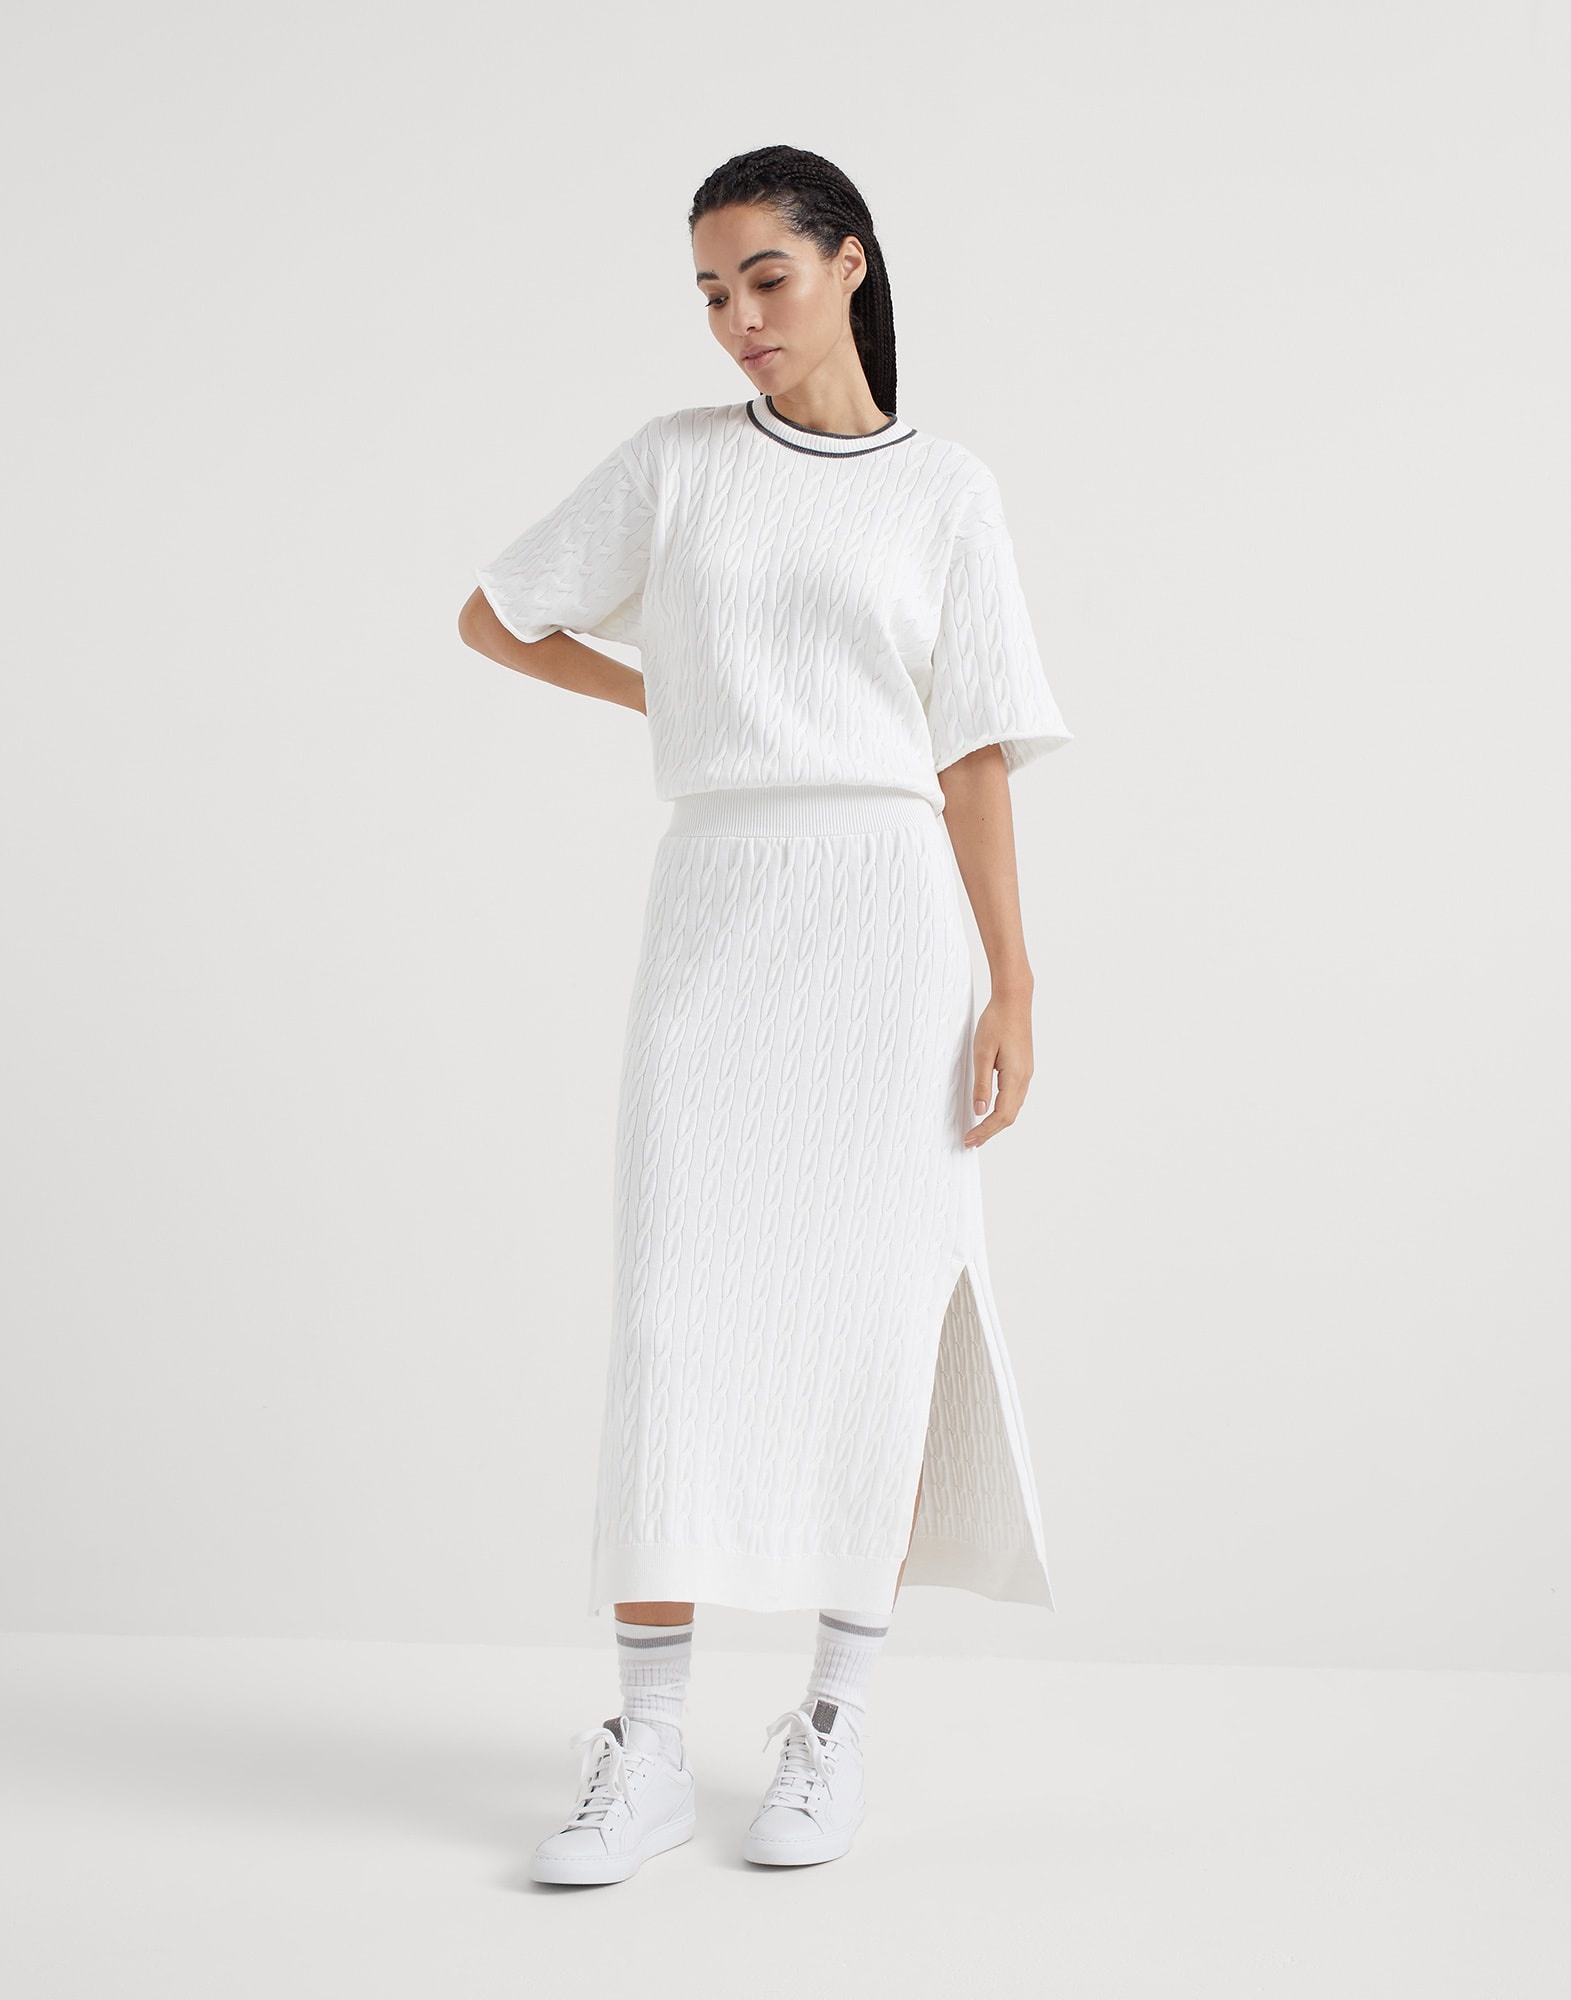 Cotton cable knit dress with shiny collar trims - 1